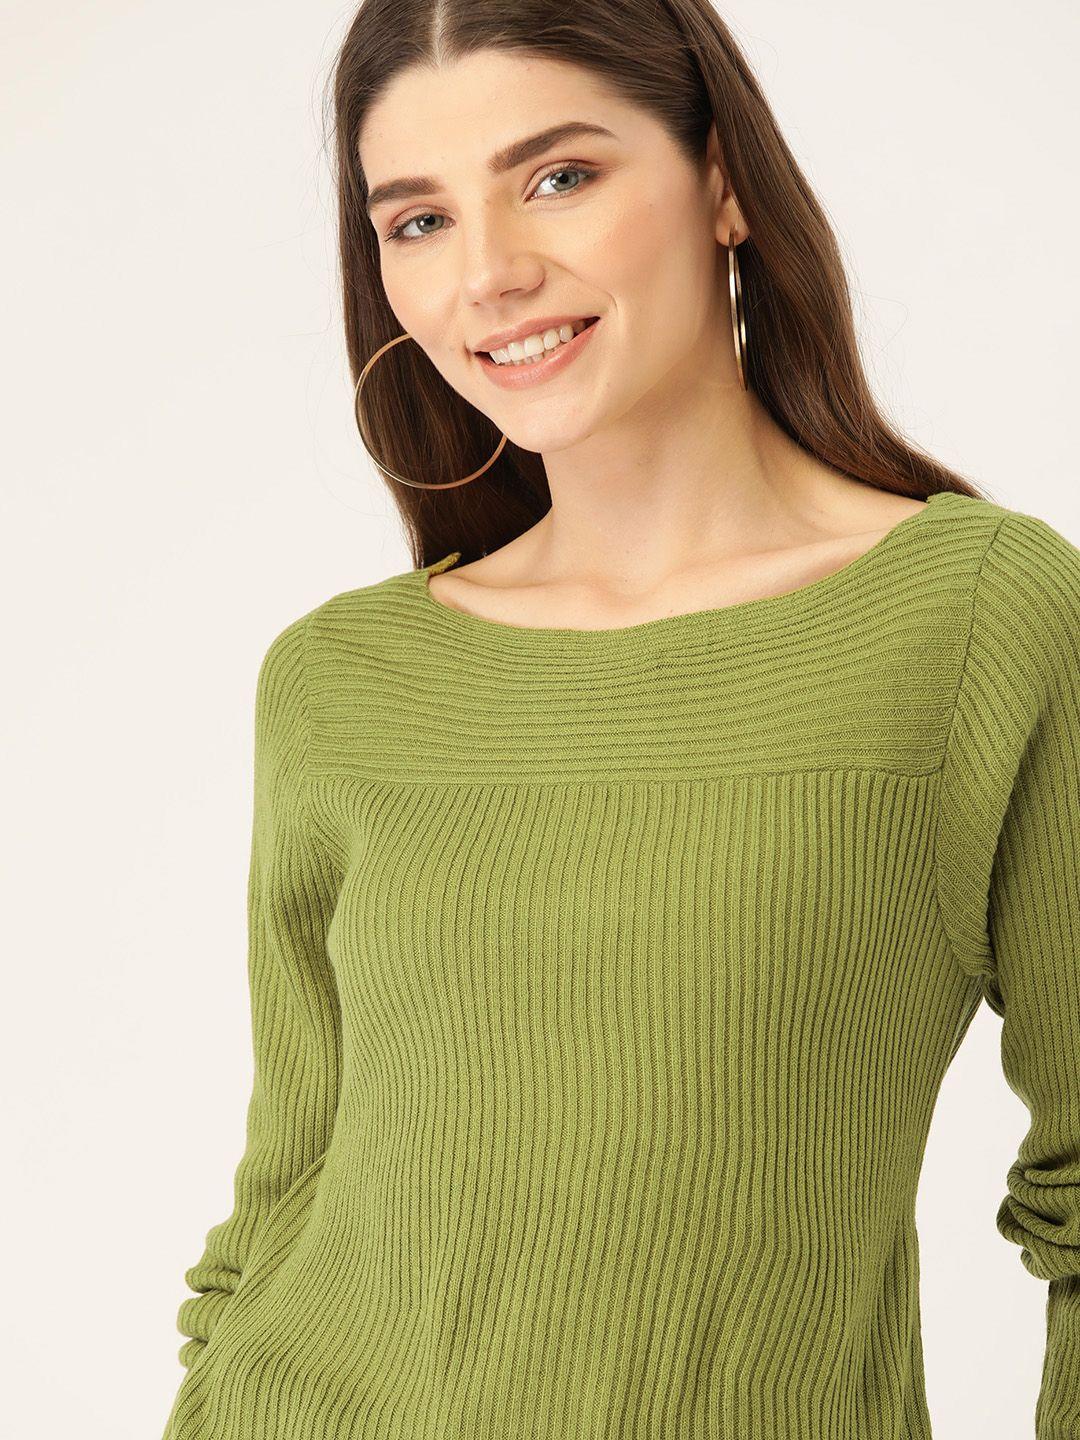 dressberry-women-olive-green-ribbed-pullover-sweater